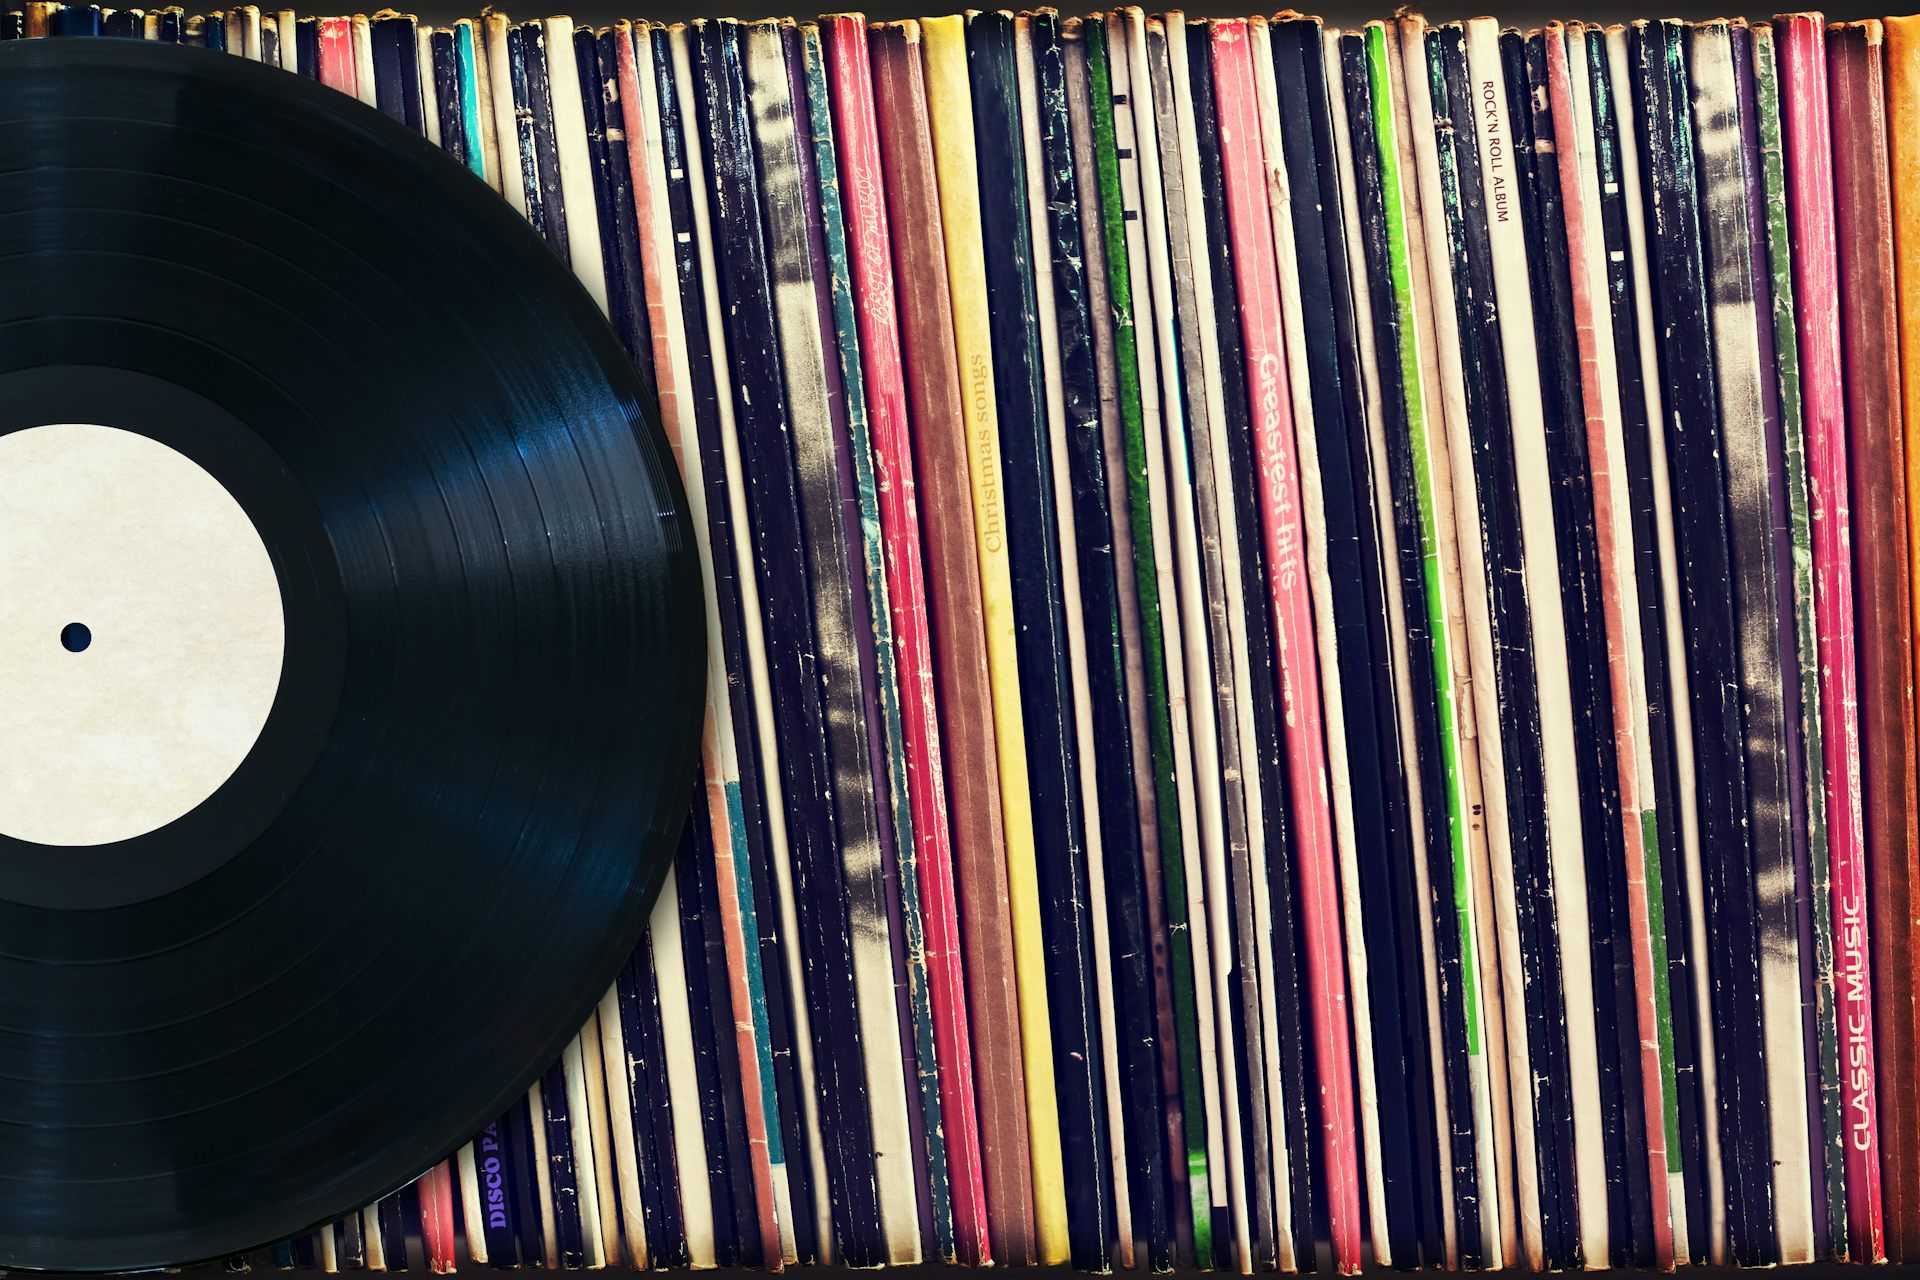 1428 Vinyl Record Wallpaper Stock Photos HighRes Pictures and Images   Getty Images